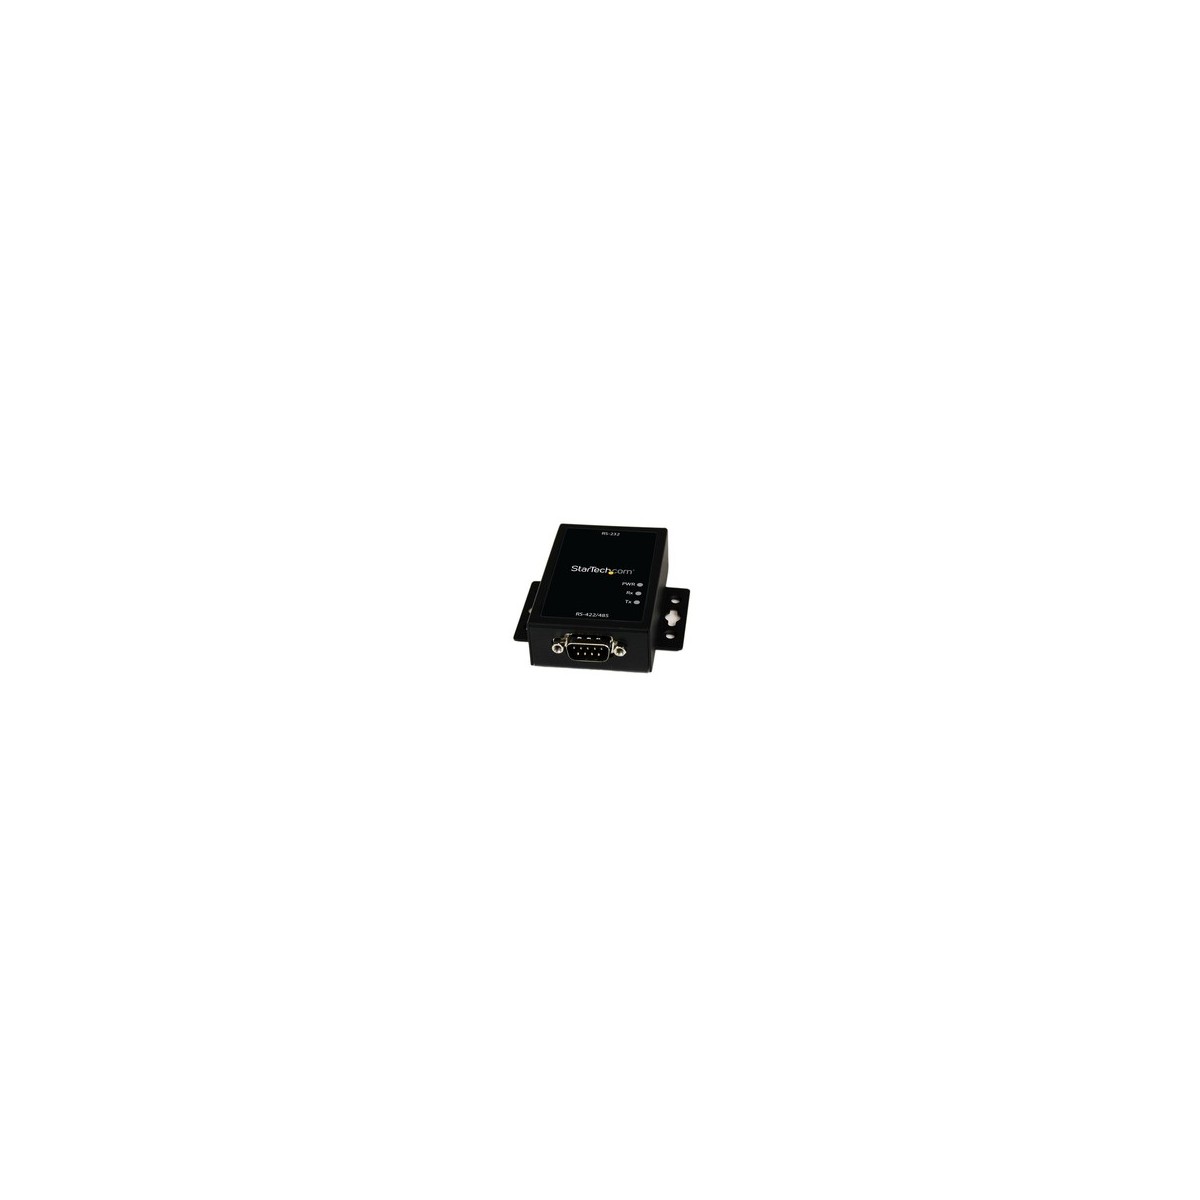 StarTech.com ST IC232485S - Adapter RS232  RS422-485, ESD